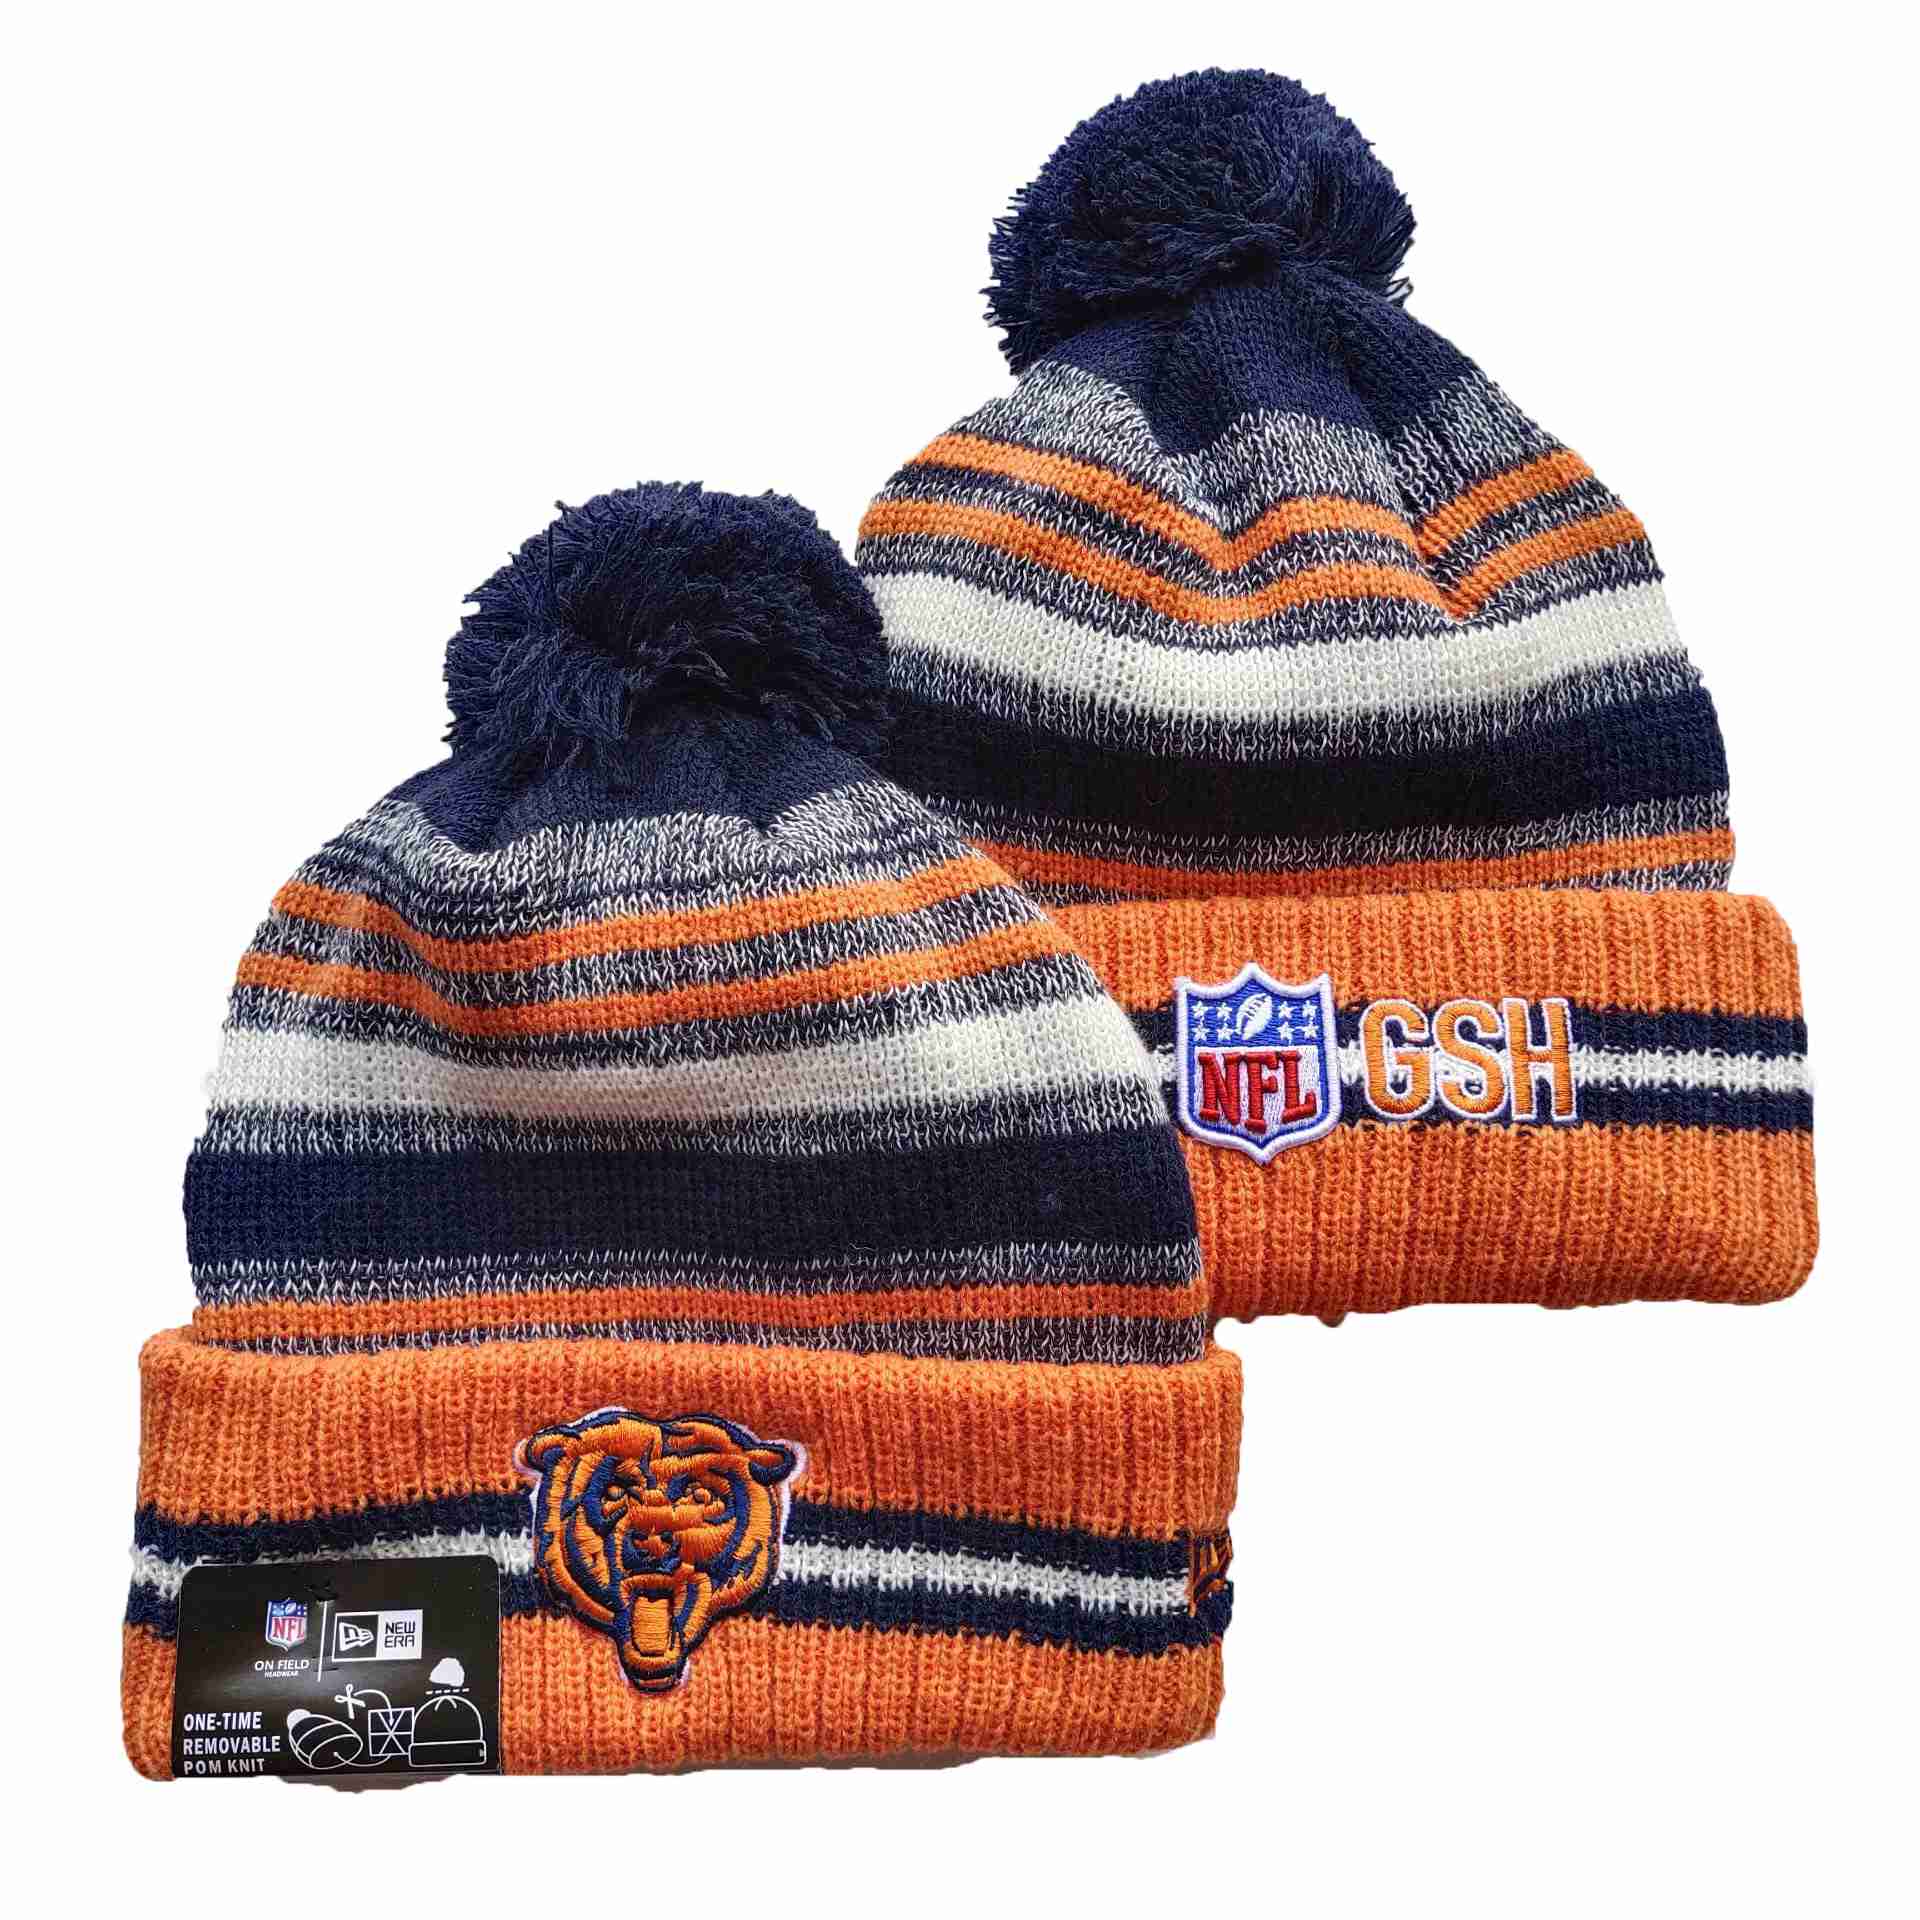 NFL Chicago Bears Beanies Knit Hats-YD897